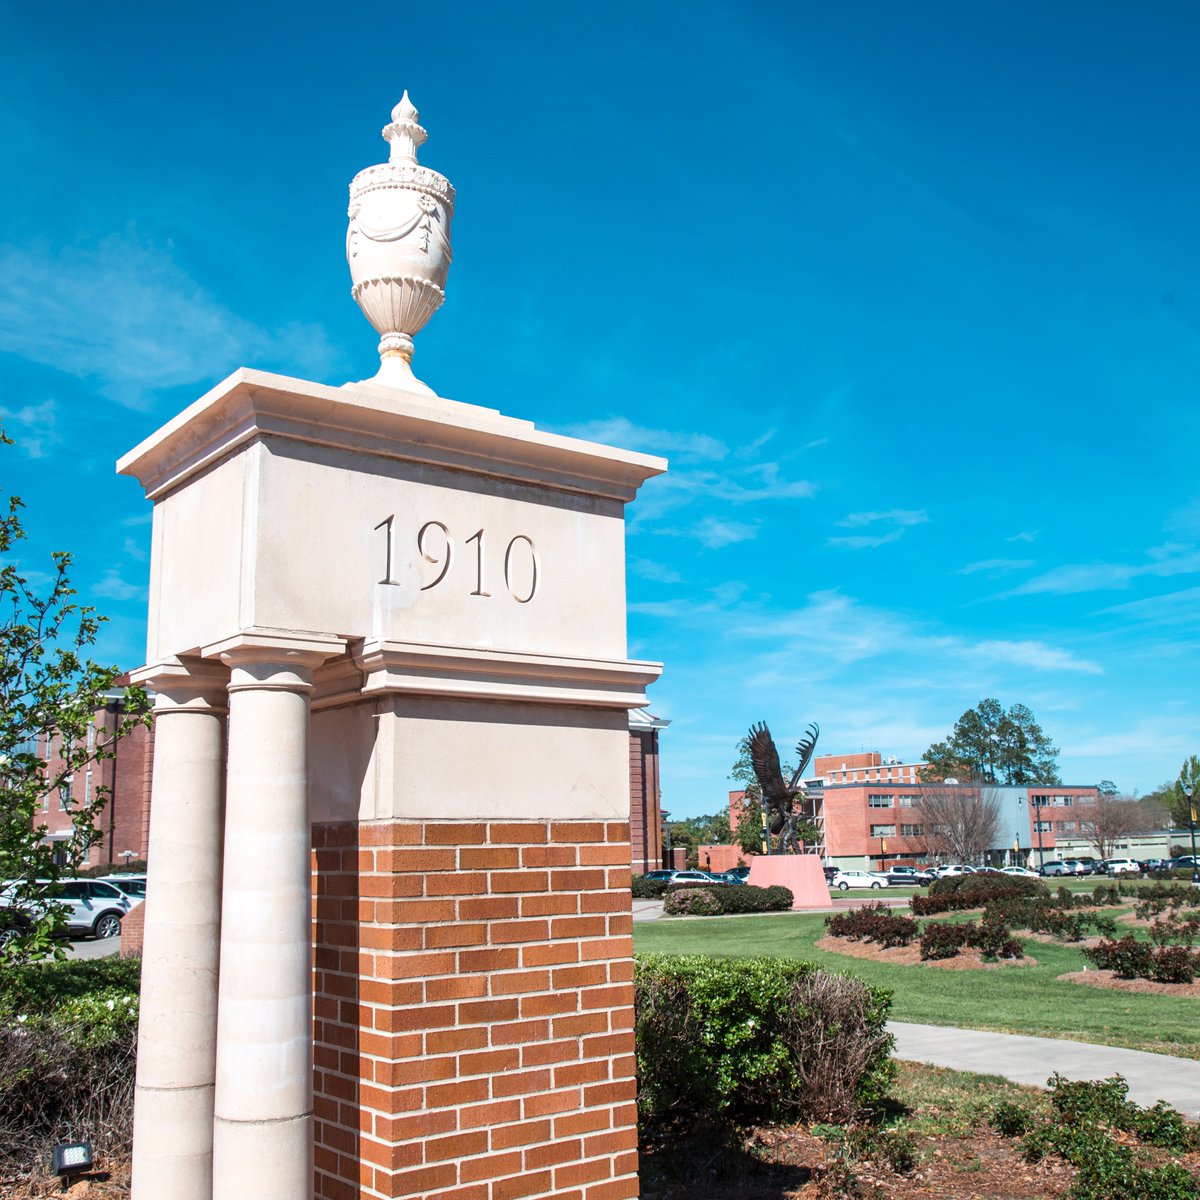 Happy Founders' Day, Southern Miss! We're celebrating 114 years since our founding. SMTTT!